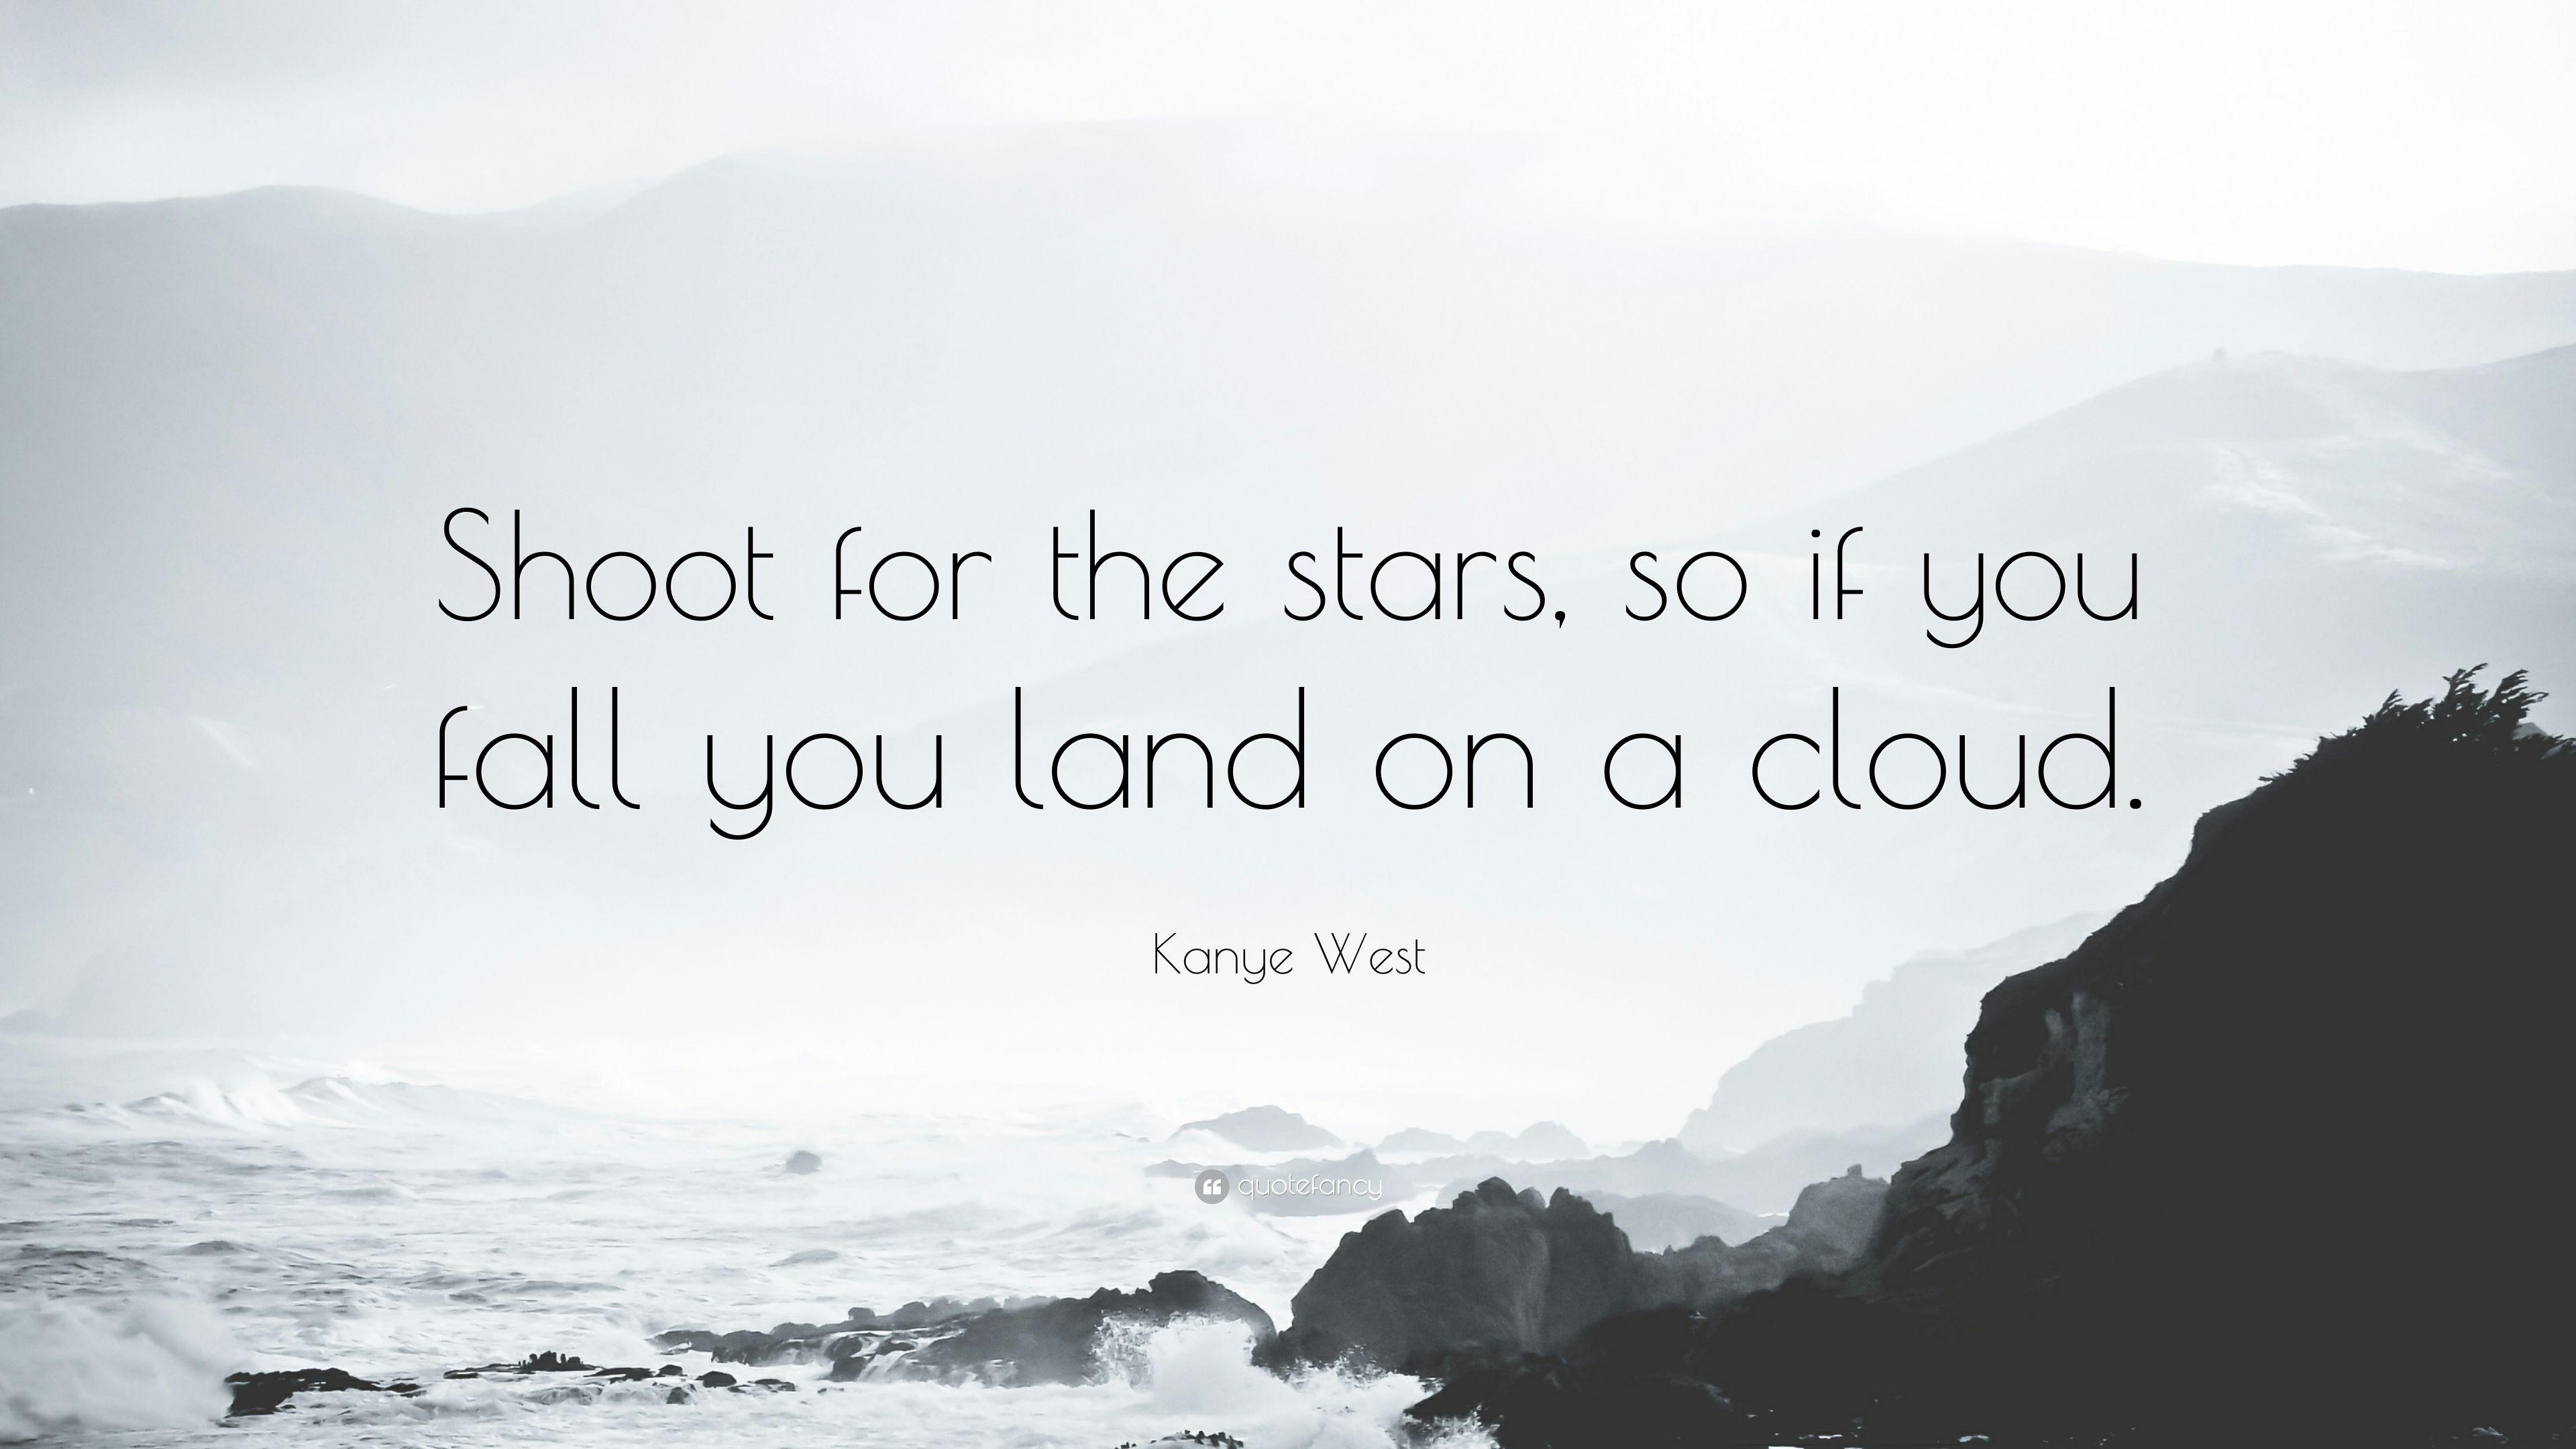 Kanye West Quote: “Shoot for the stars, so if you fall you land